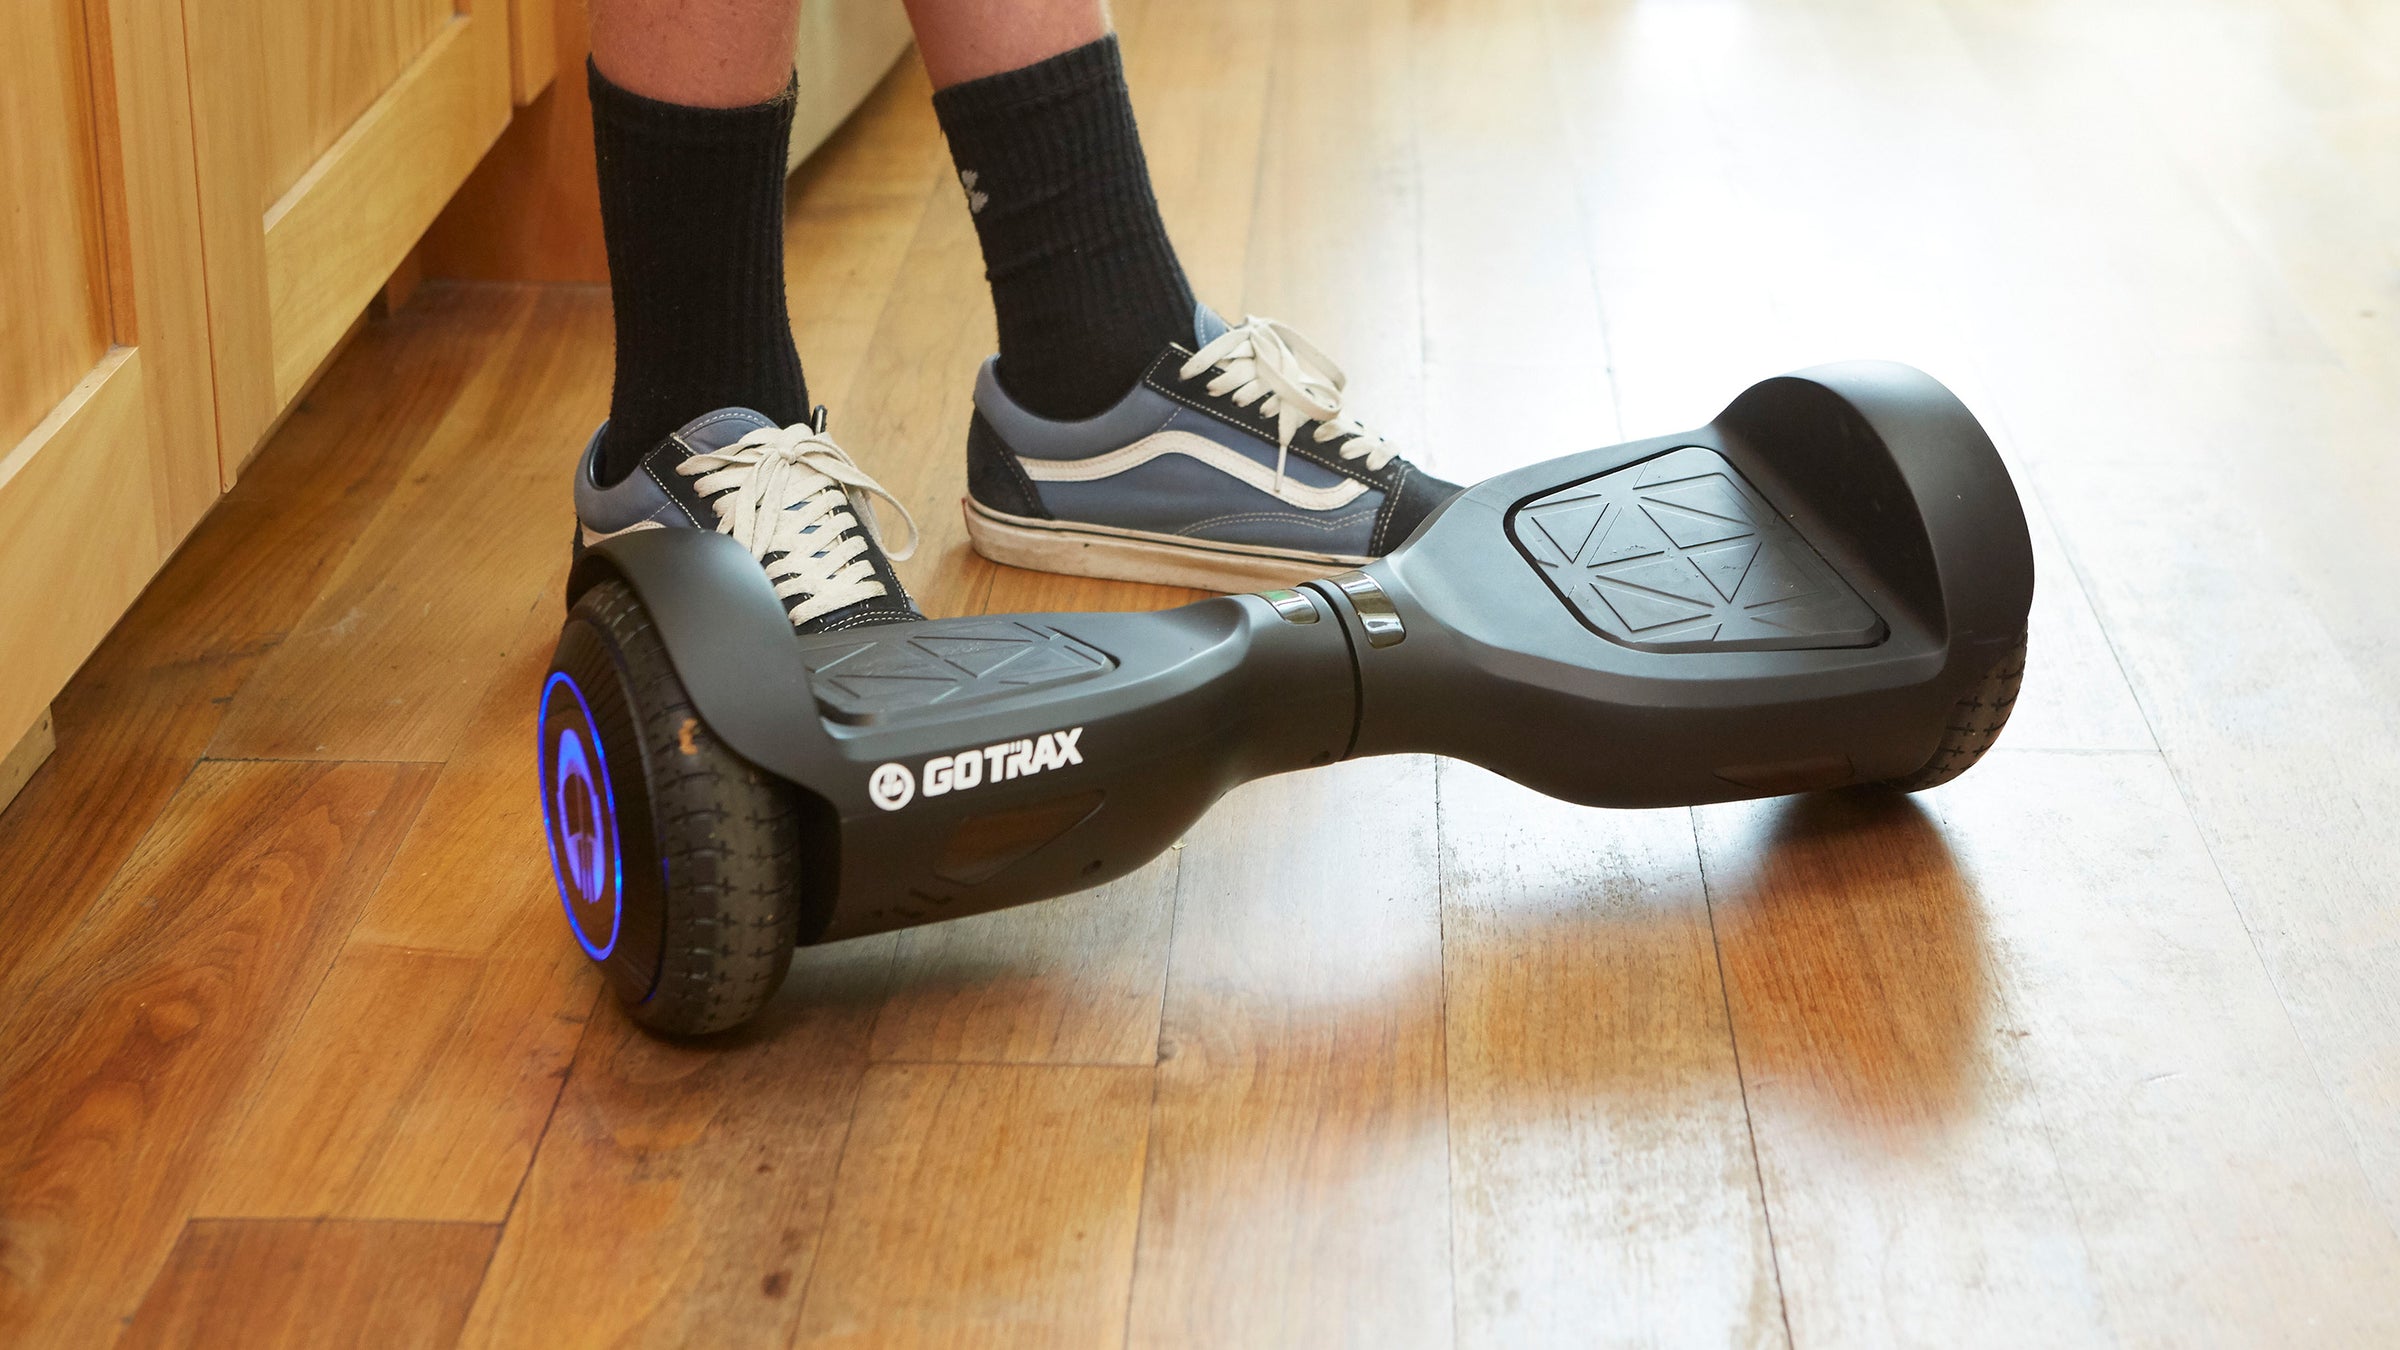 GOTRAX Black Edge Hoverboard for Kids with LEDs